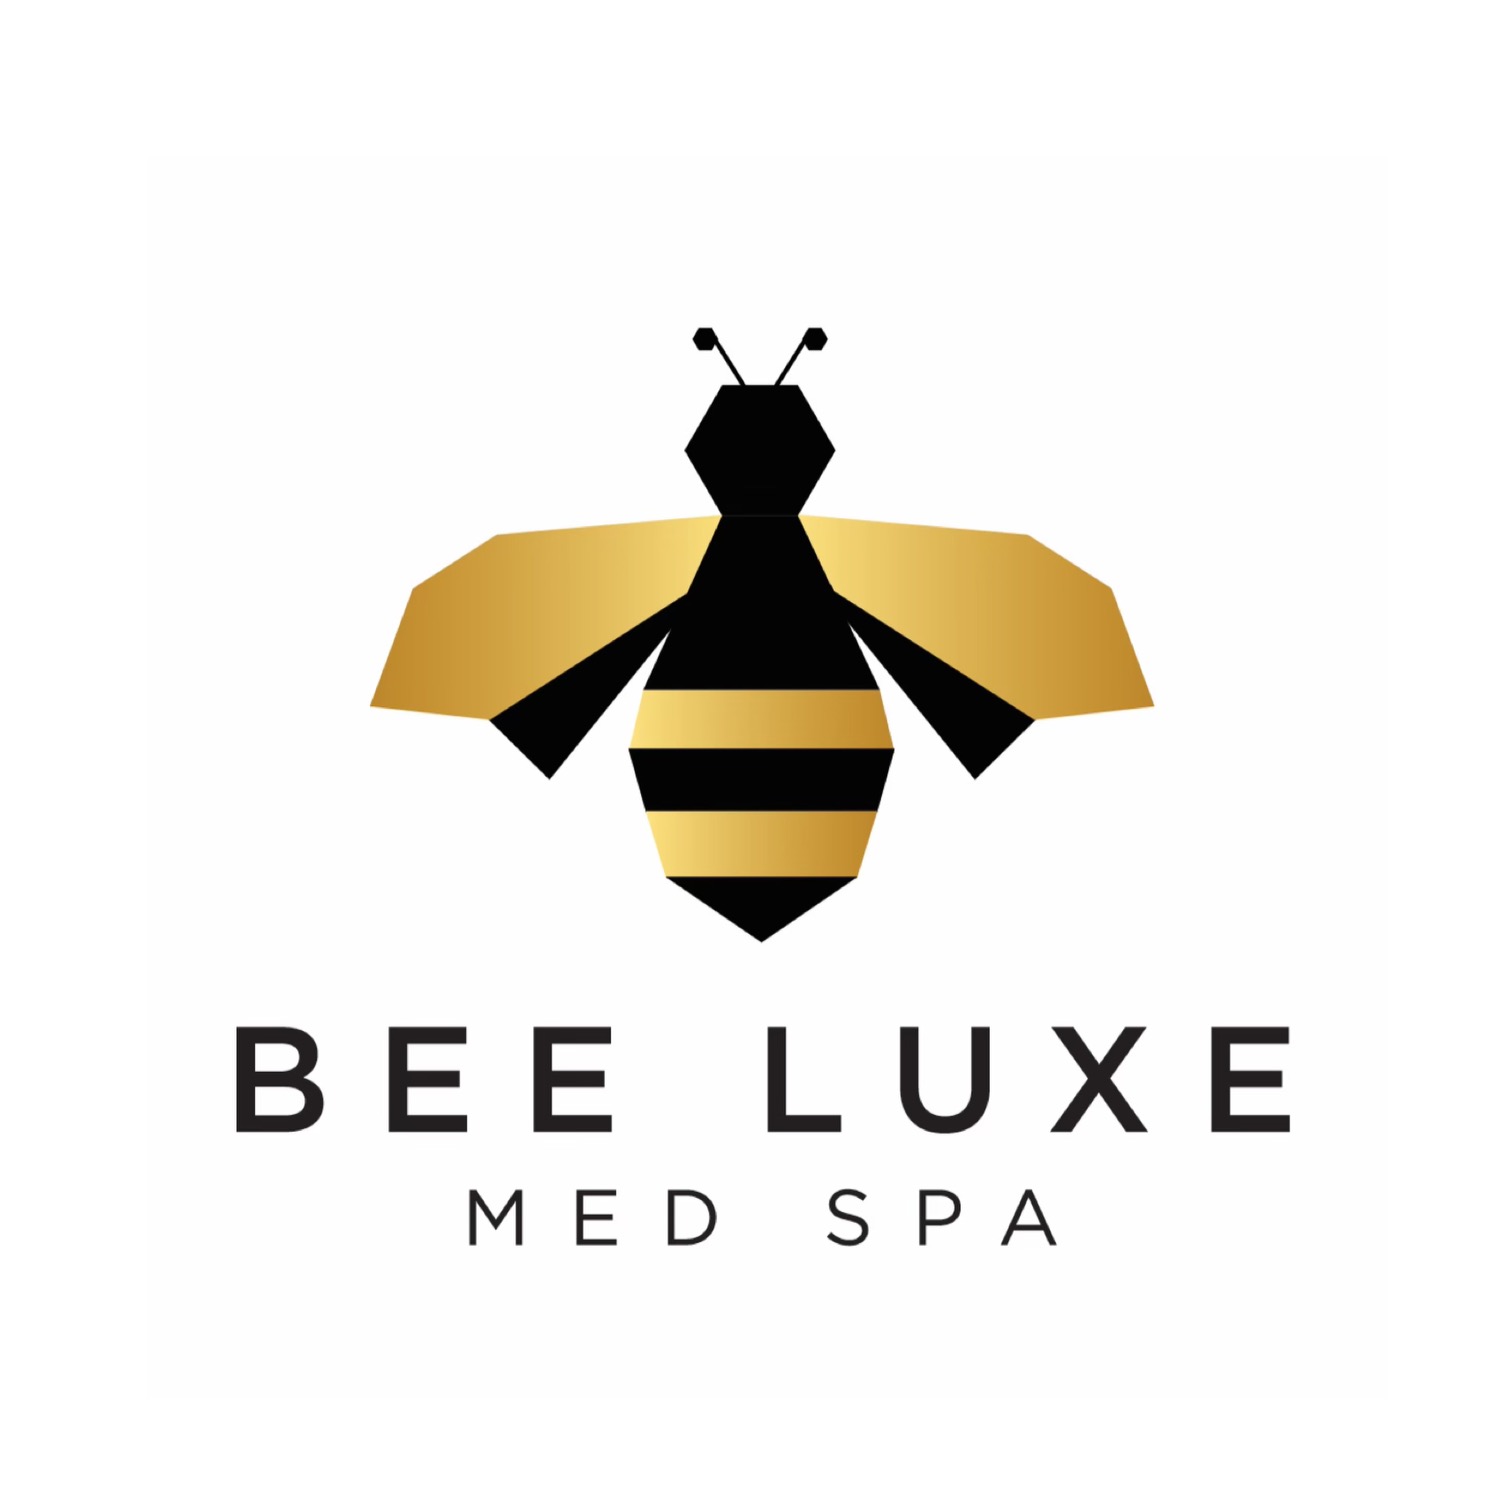 Bee luxe med spa 4000 N State Rd 7, Lauderdale Lakes Florida 33319